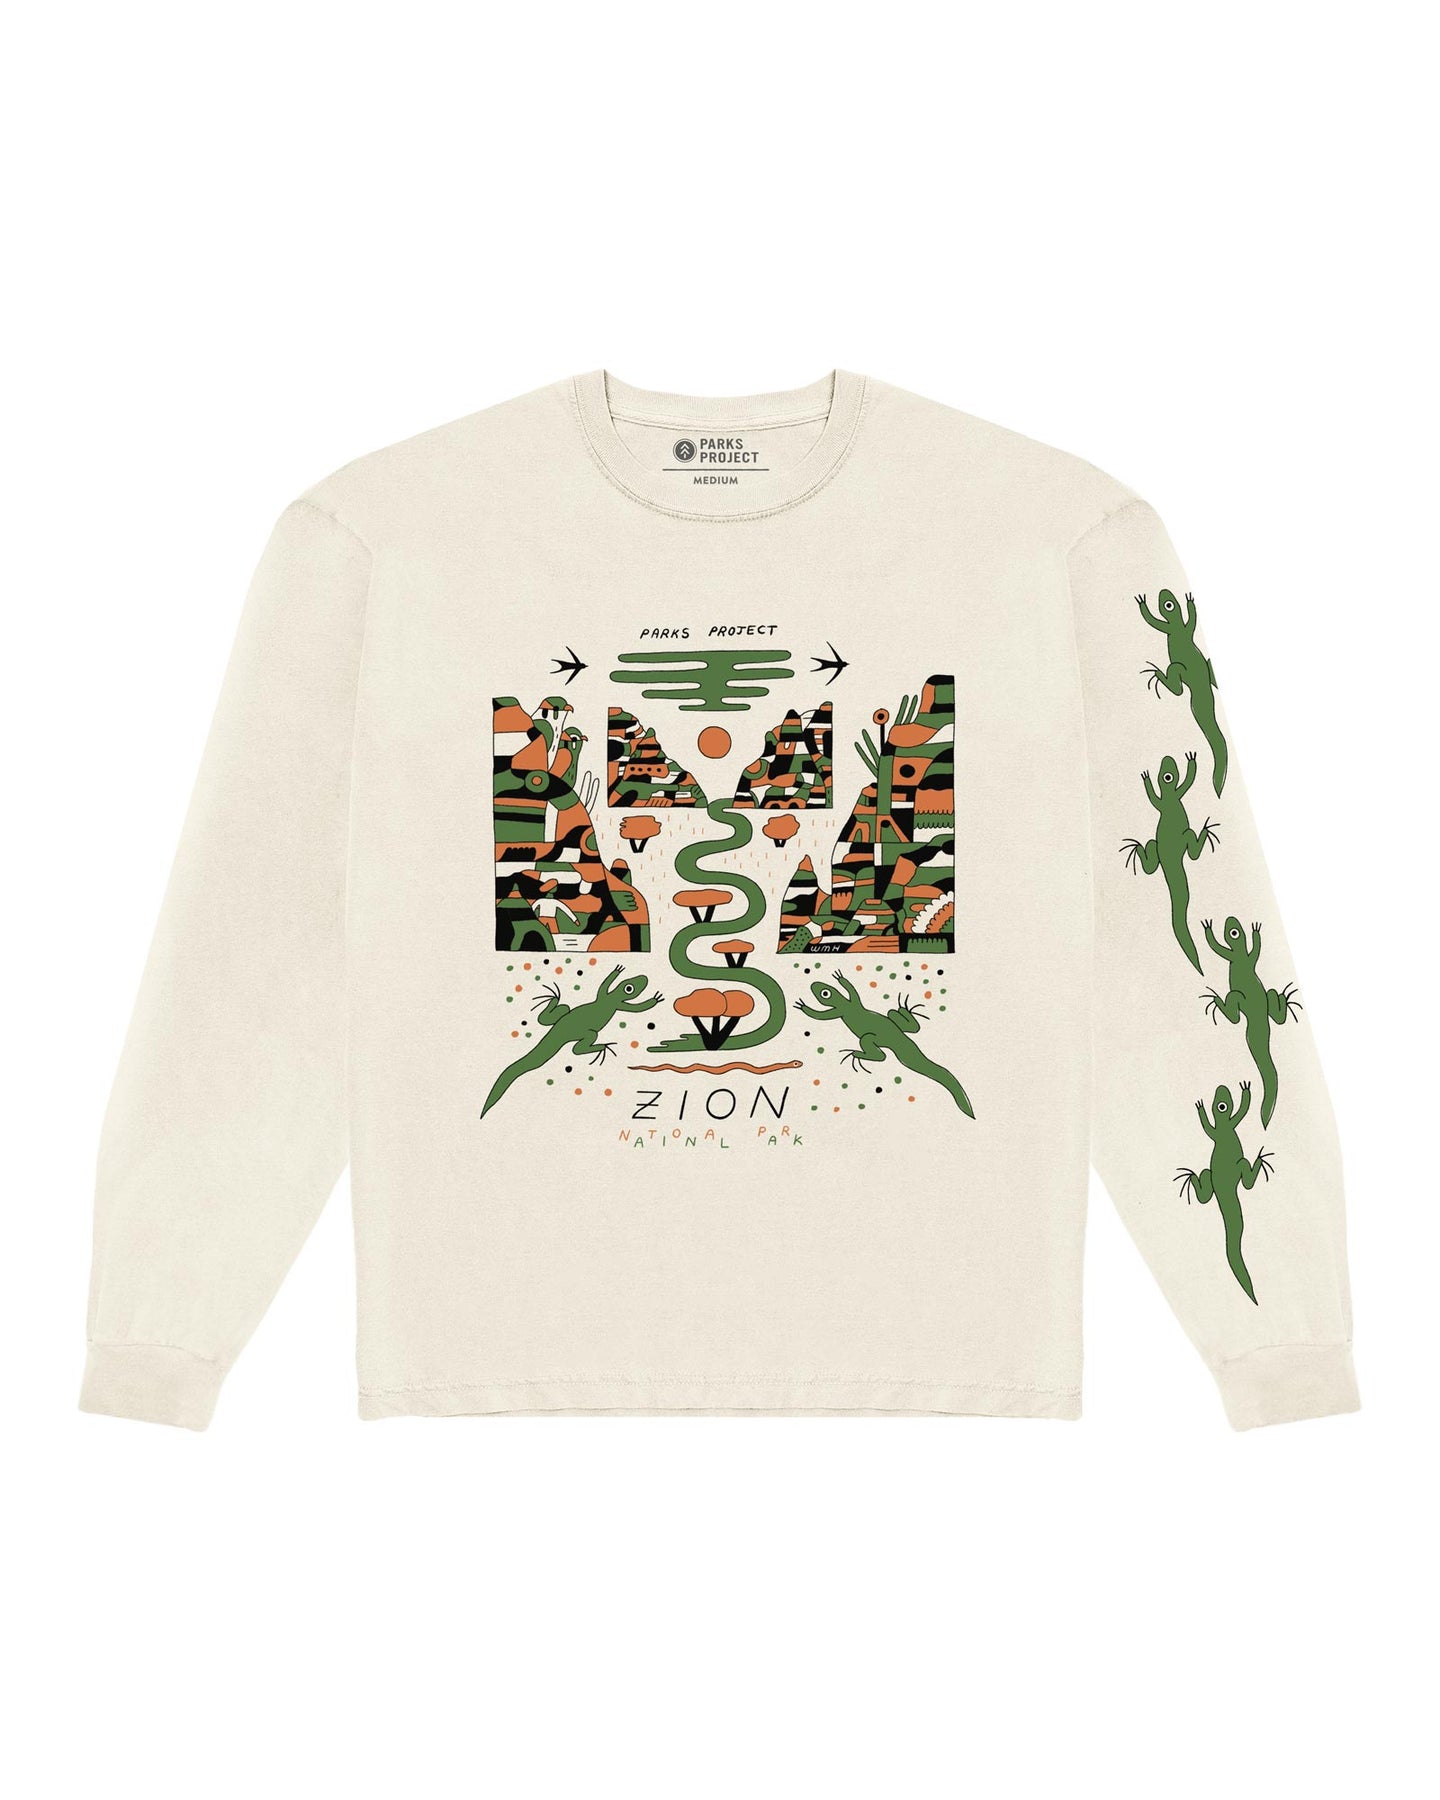 PARKS PROJECT Zion Lizards Long sleeve Tee ｜ ZN002002